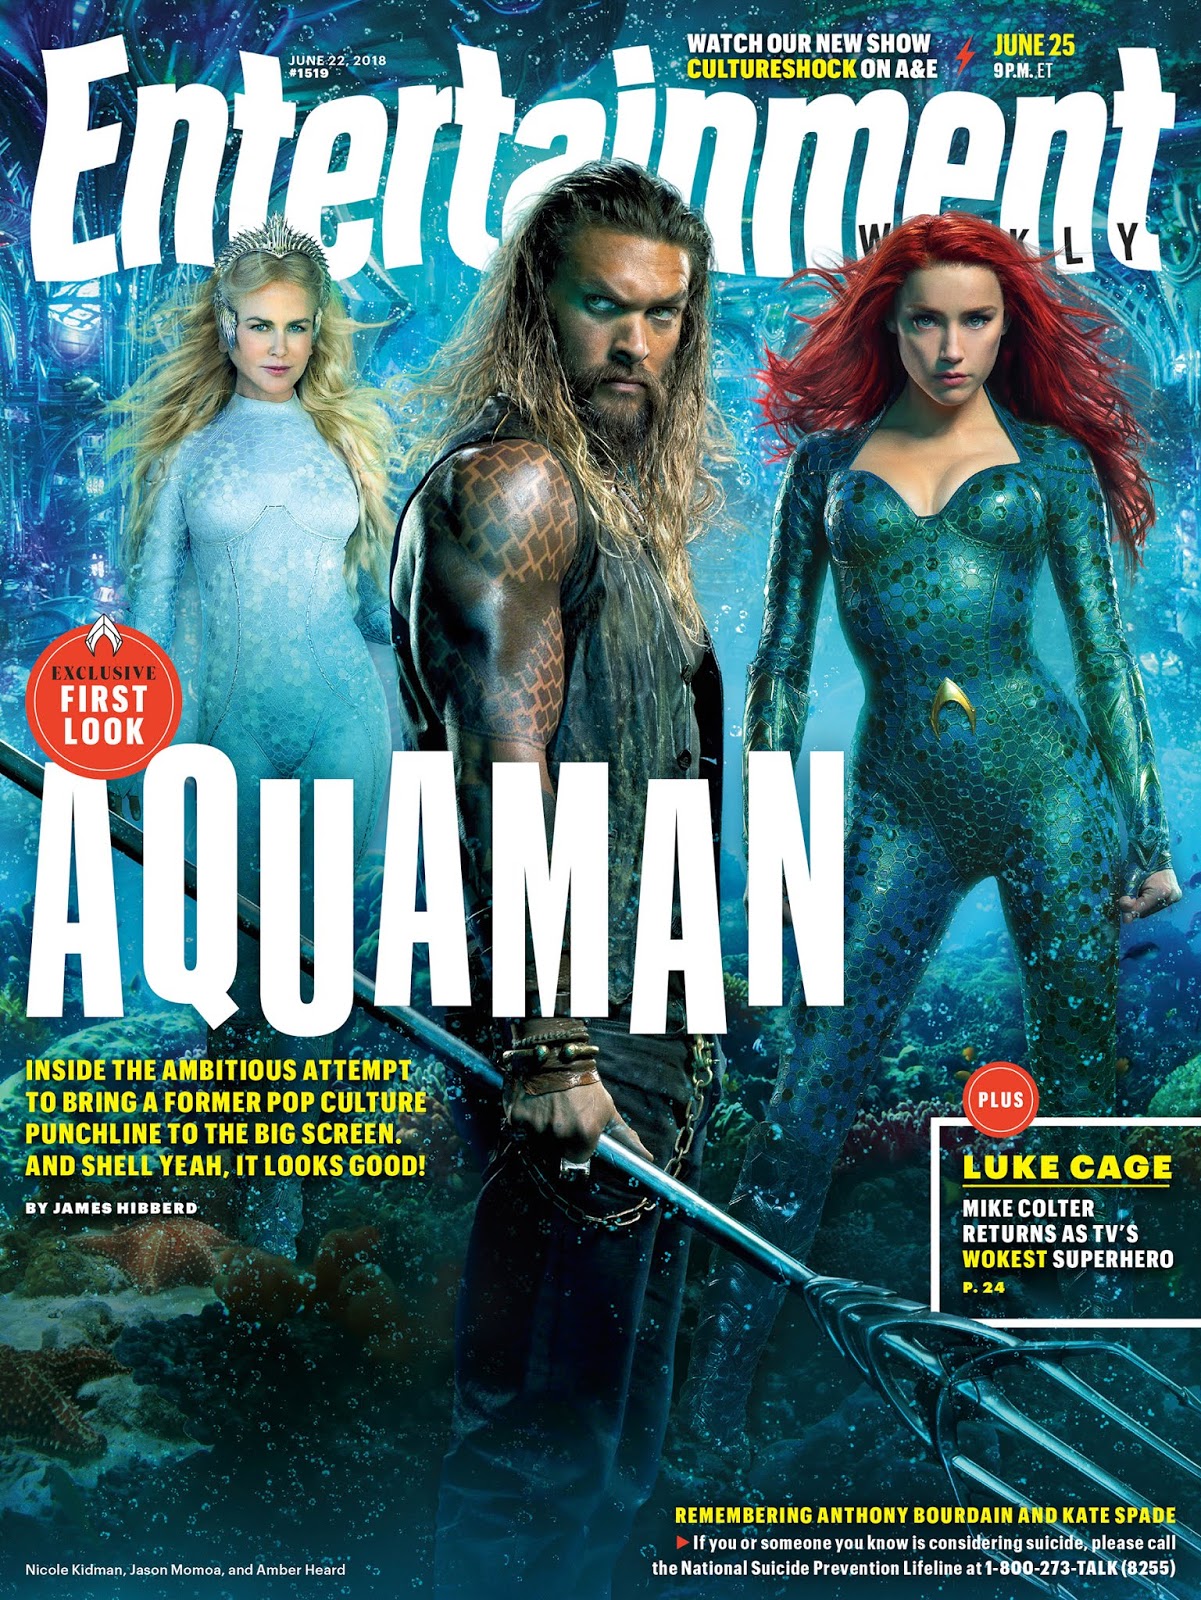 AQUAMAN on Entertainment Weekly: Covers & Image Still Reveals!